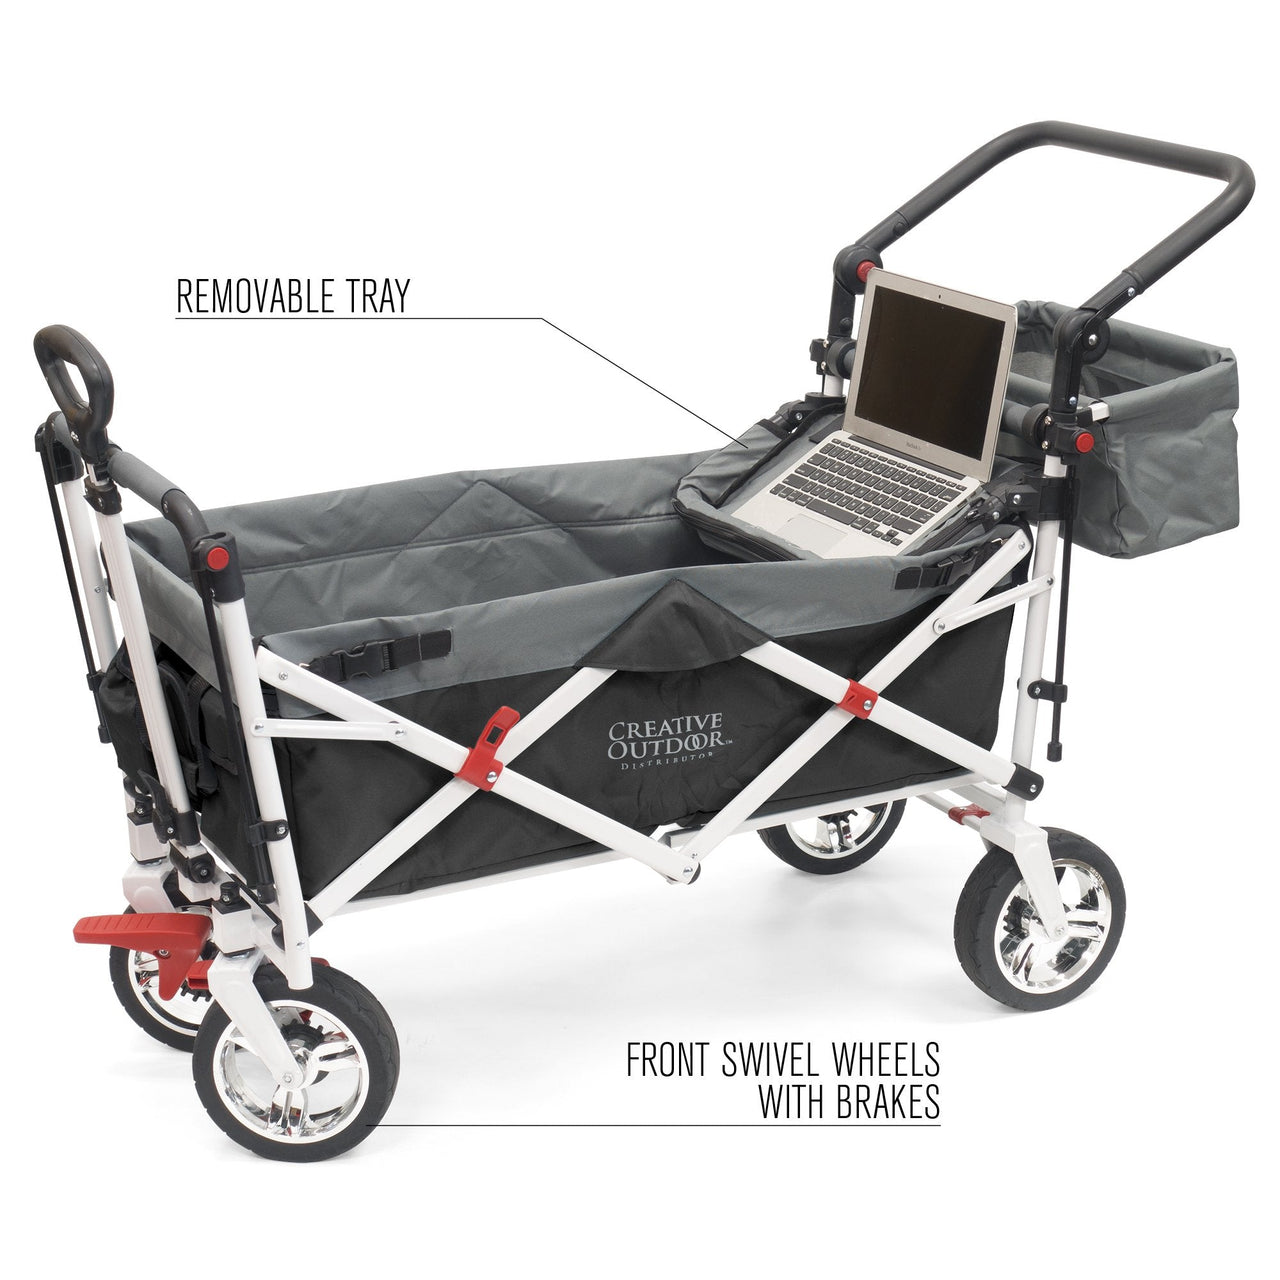 push-pull-silver-series-plus-folding-wagon-stroller-with-canopy-black